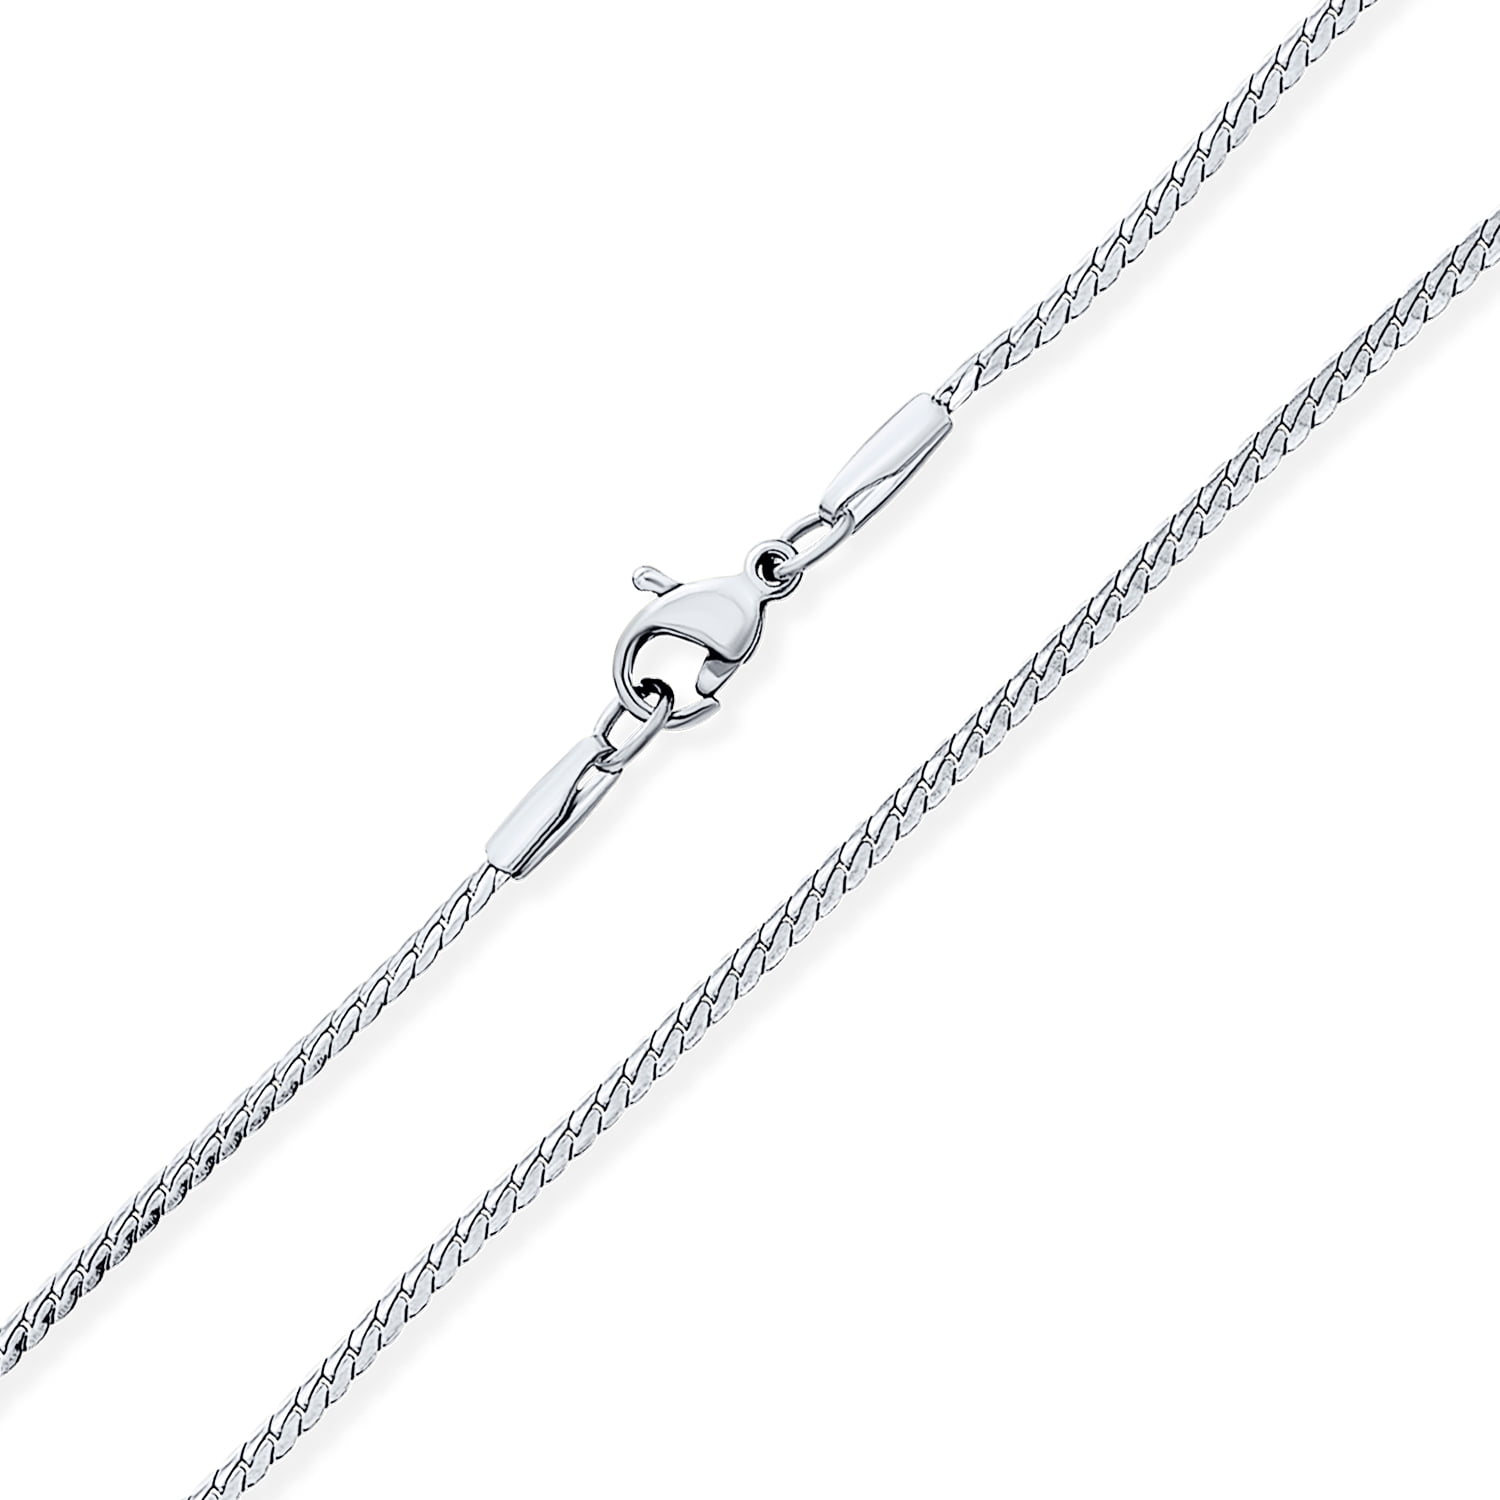 Flat Gold Chain Mens Snake Chain Necklace Silver Snake Chain